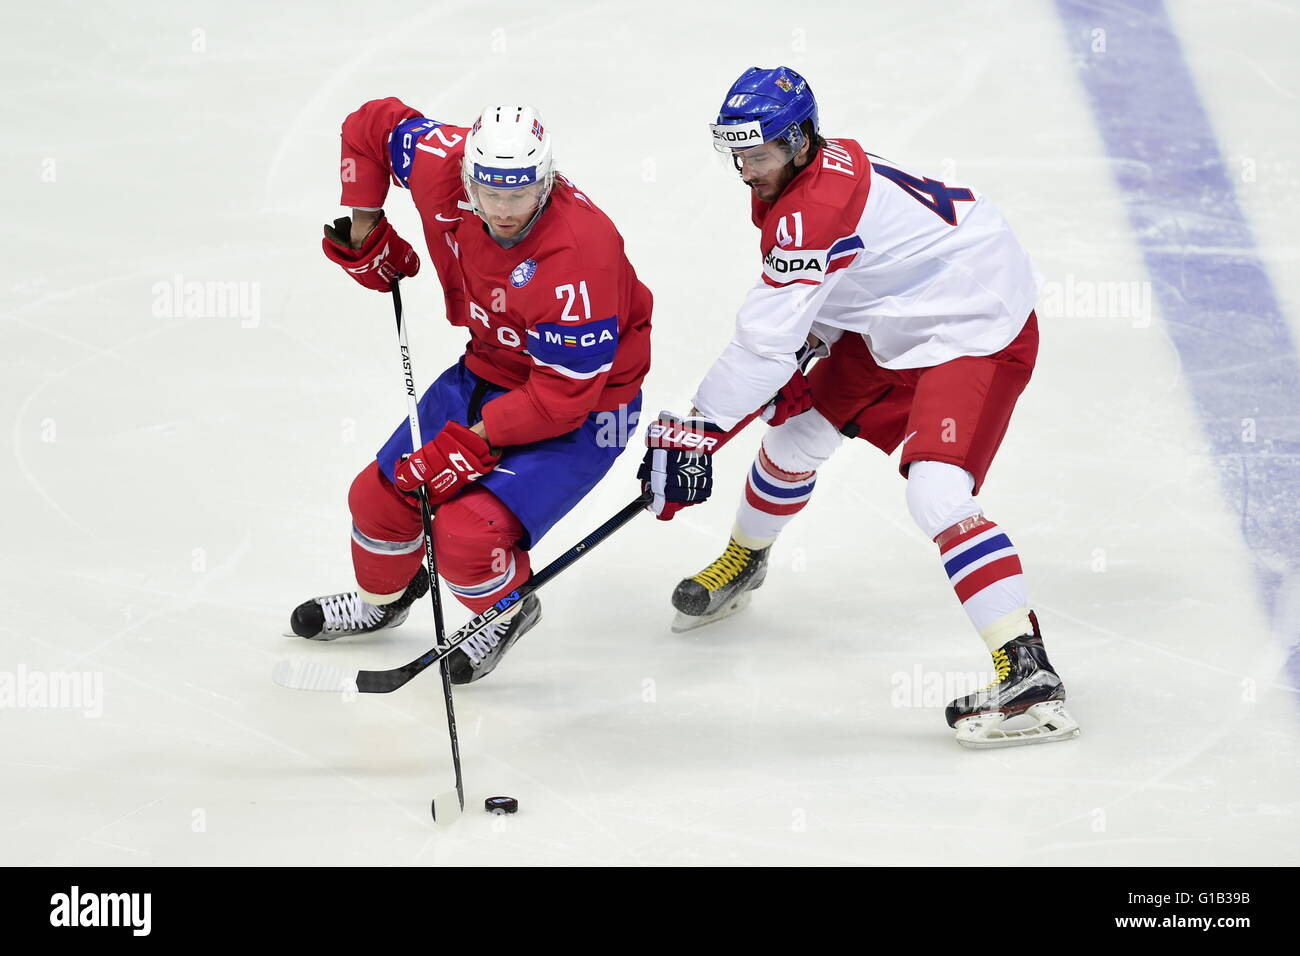 Moscow, Russian Federation. 12th May, 2016. From left: Morten Ask (NOR) and Tomas Filippi (CZE) in action during the Ice Hockey World Championships Group A match Czech Republic vs Norway in Moscow, Russia, on May 12, 2016. © Roman Vondrous/CTK Photo/Alamy Live News Stock Photo